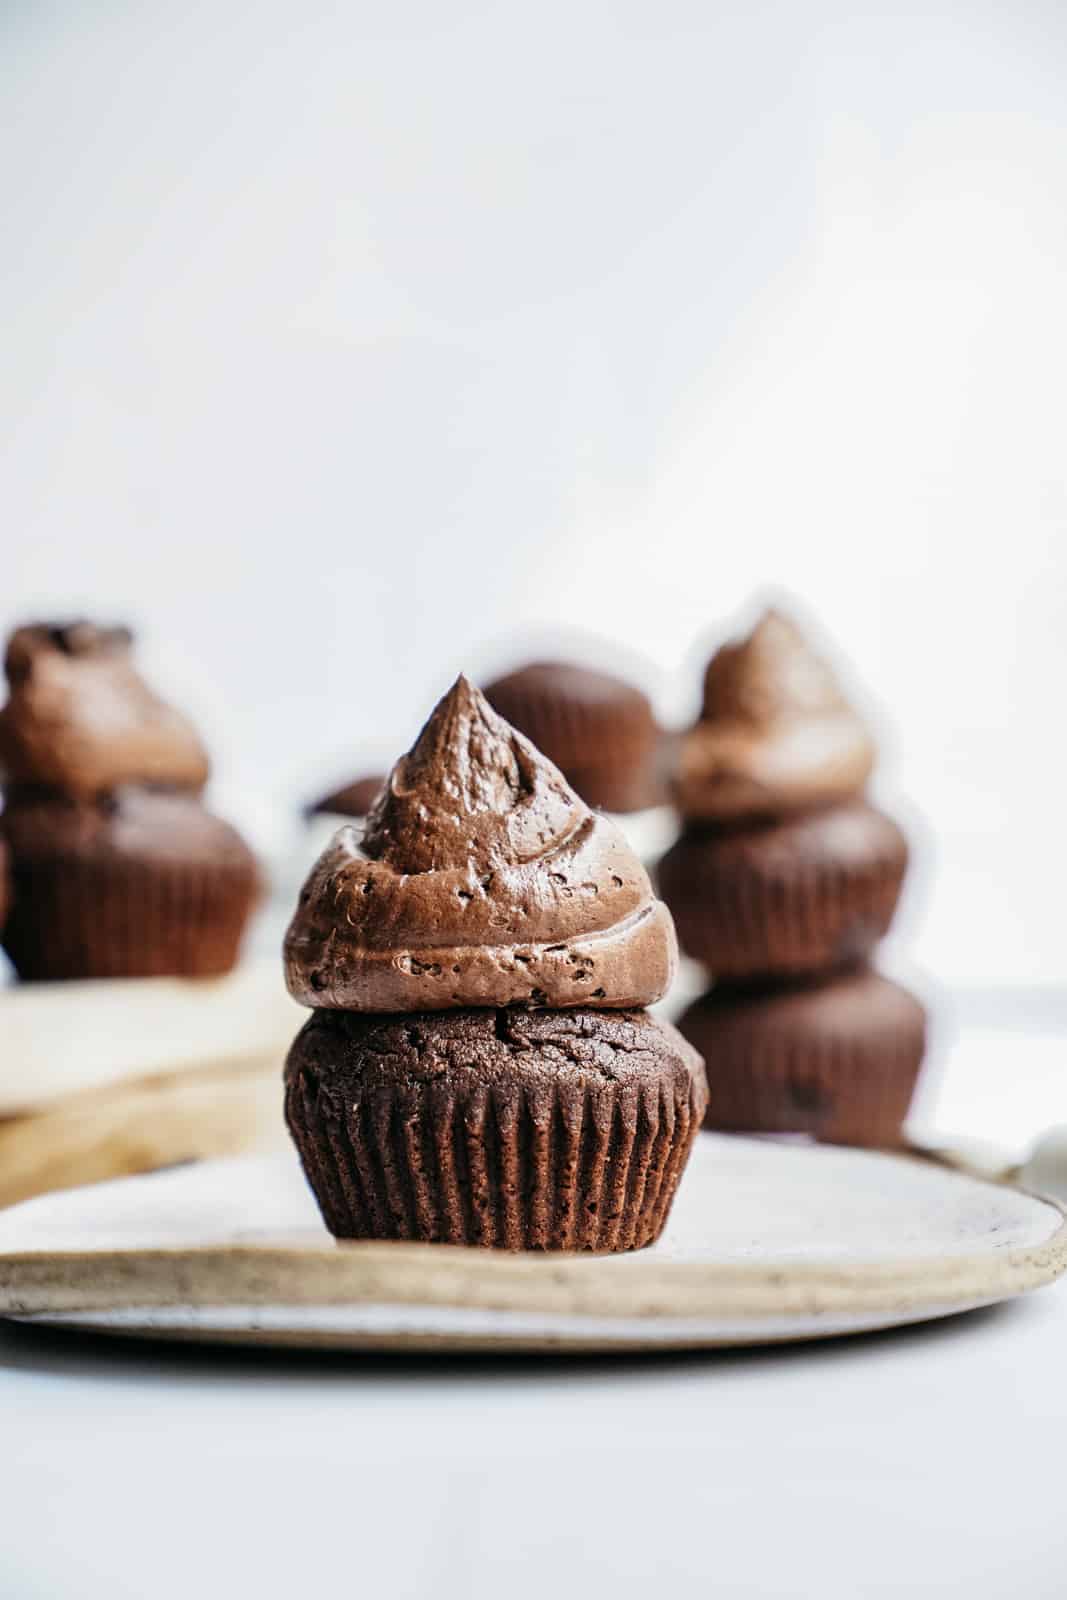 A beautiful chocolate muffin with a big dollop of creamy icing on top sitting on a plate.